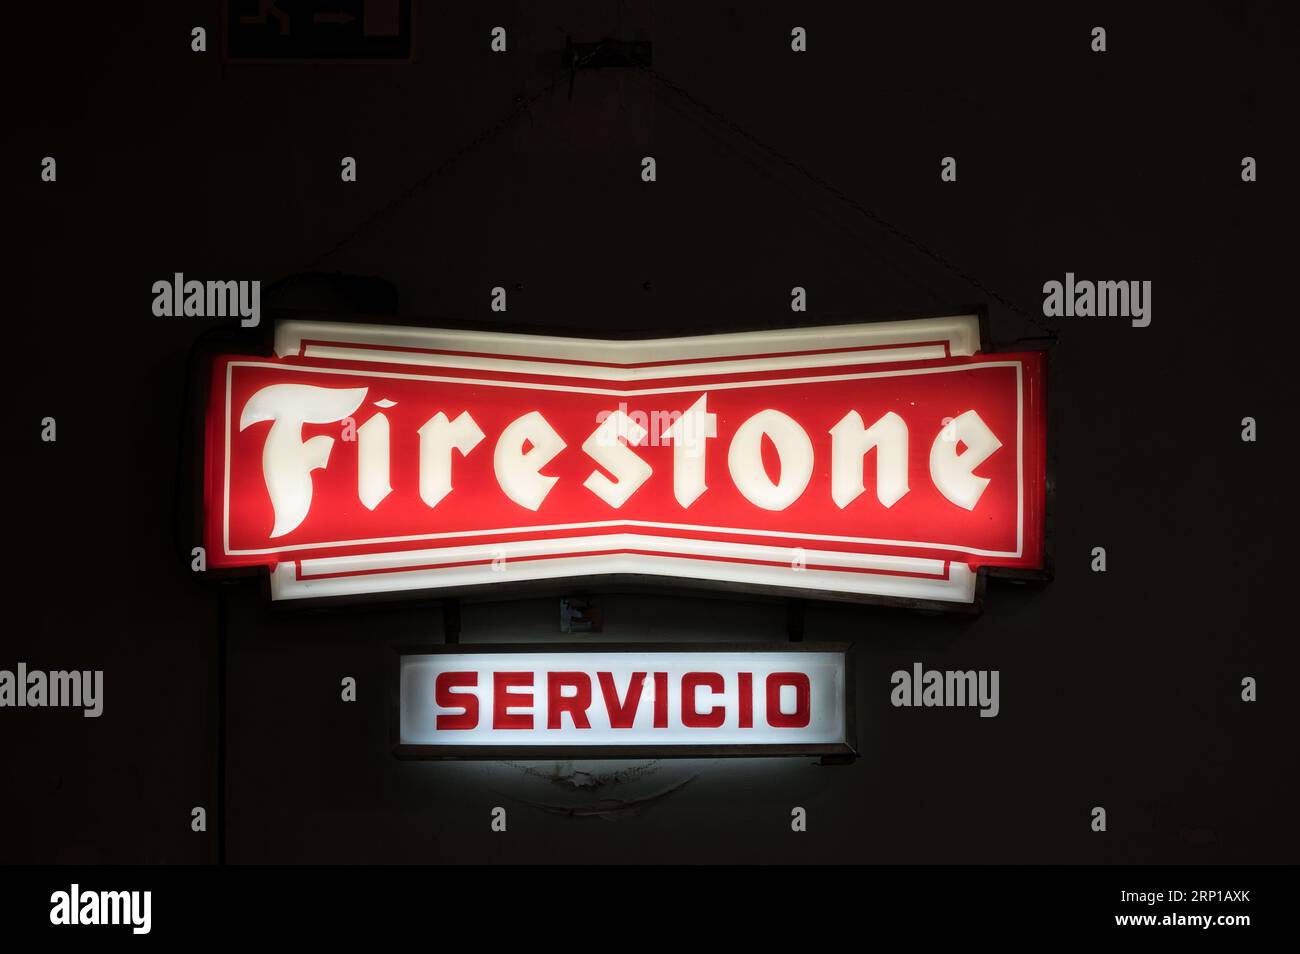 A closeup of an old illuminated sign for the Firestone service station in an old workshop Stock Photo